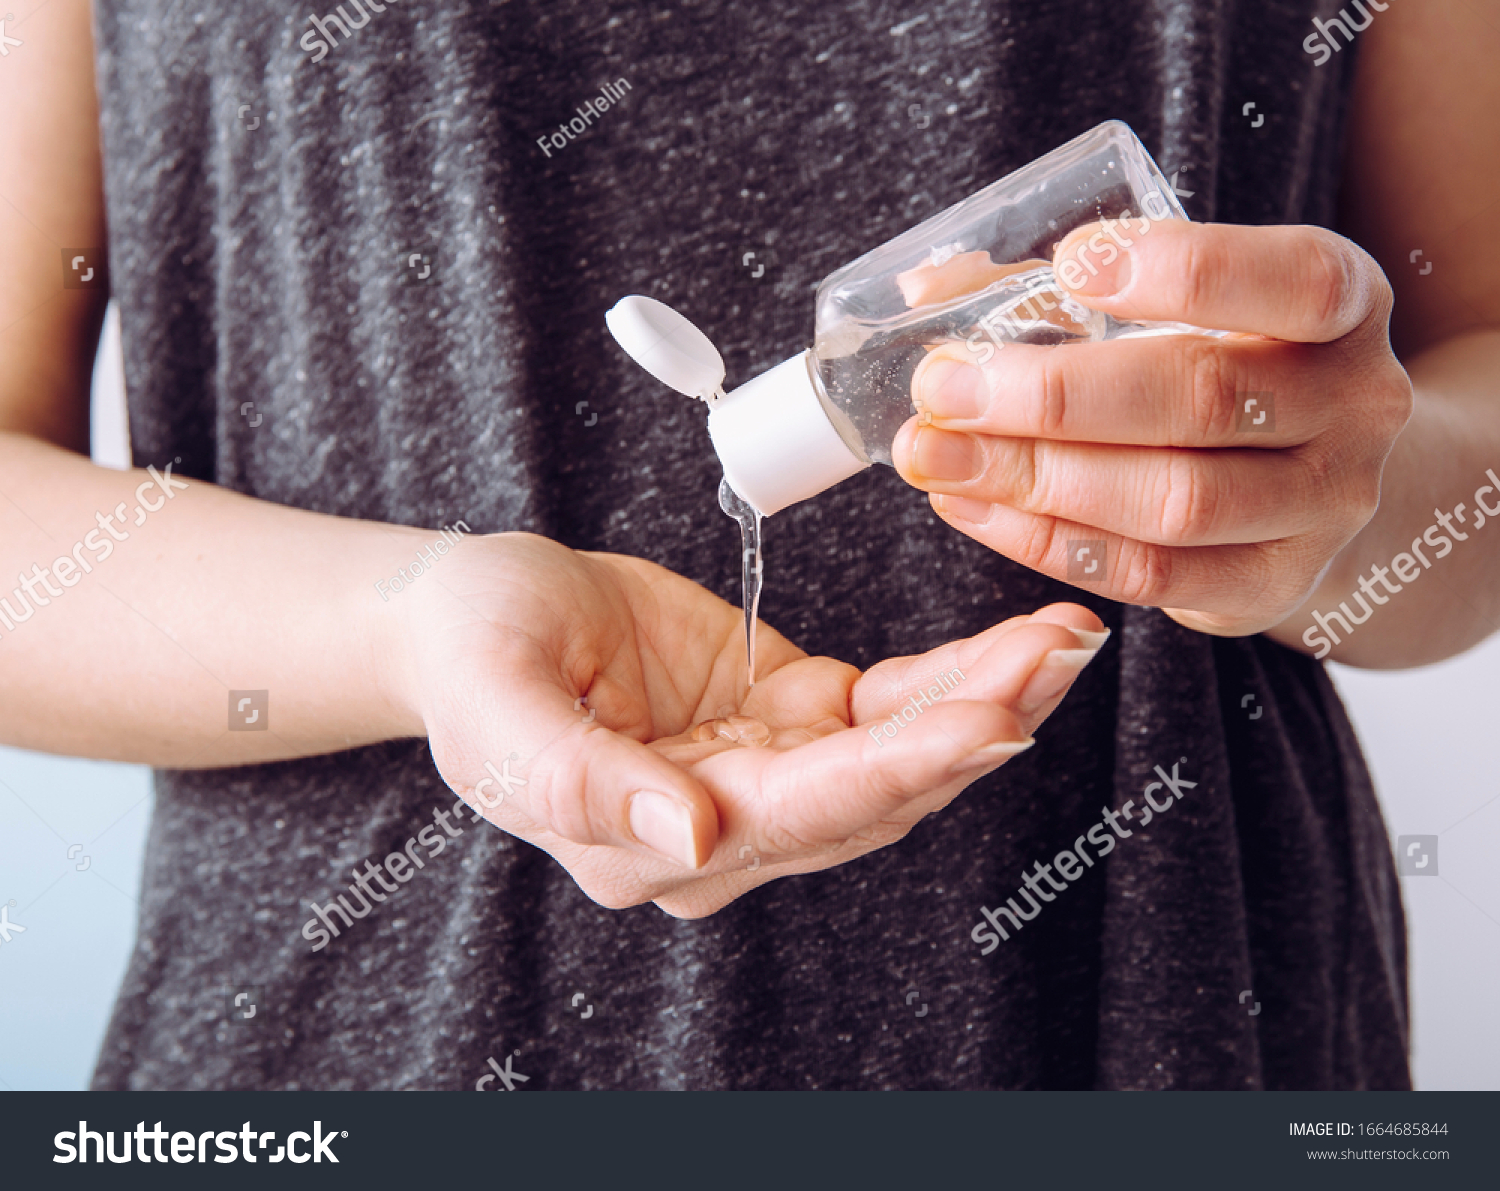 Close up view of woman person using small portable antibacterial hand sanitizer on hands. #1664685844